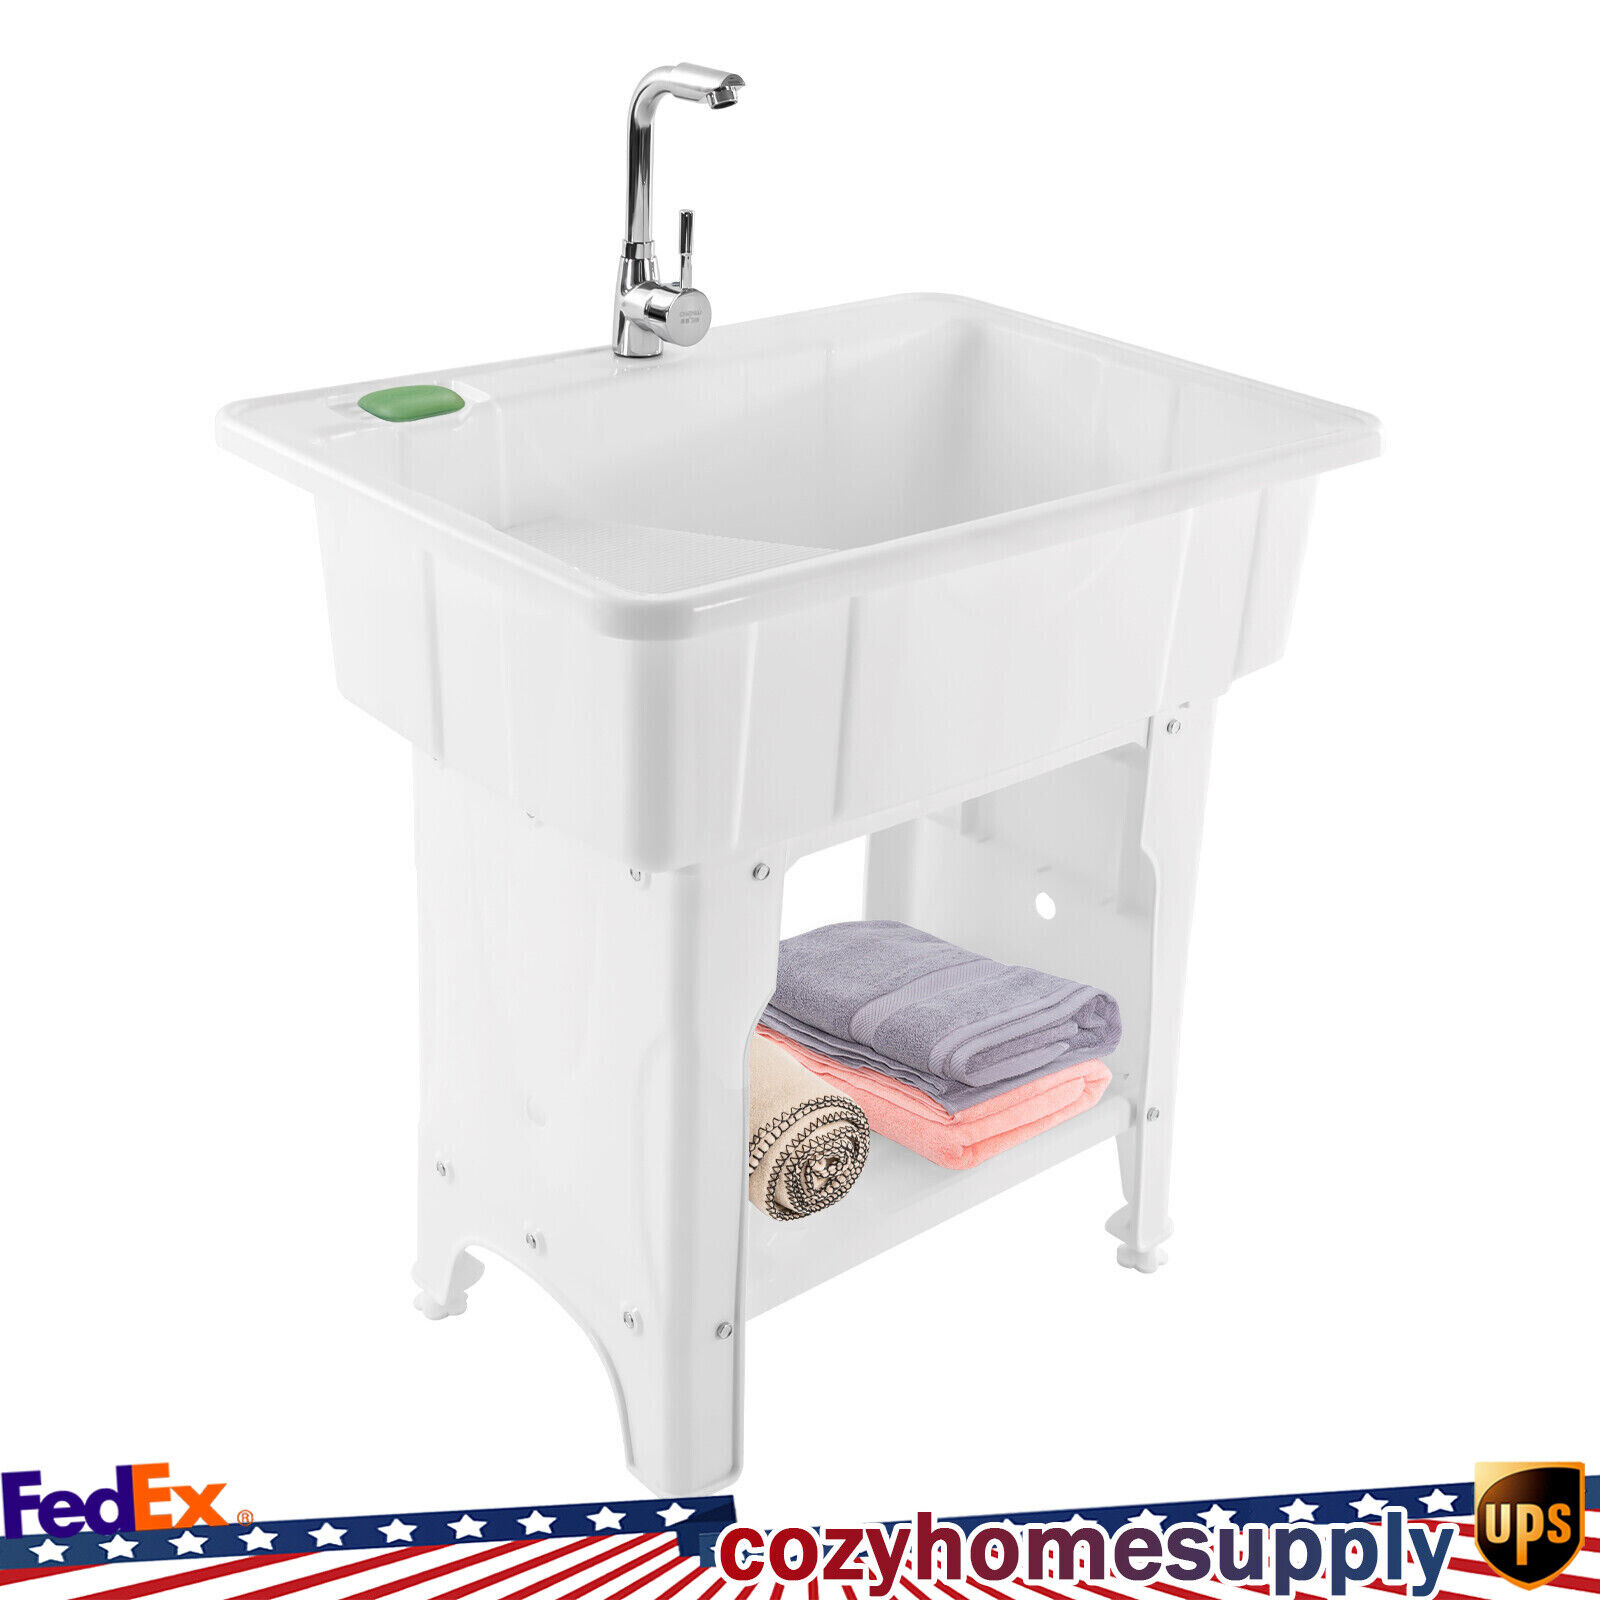 Utility Sink Laundry Tub with Faucet & Basement for Laundry Room Garage or Shop